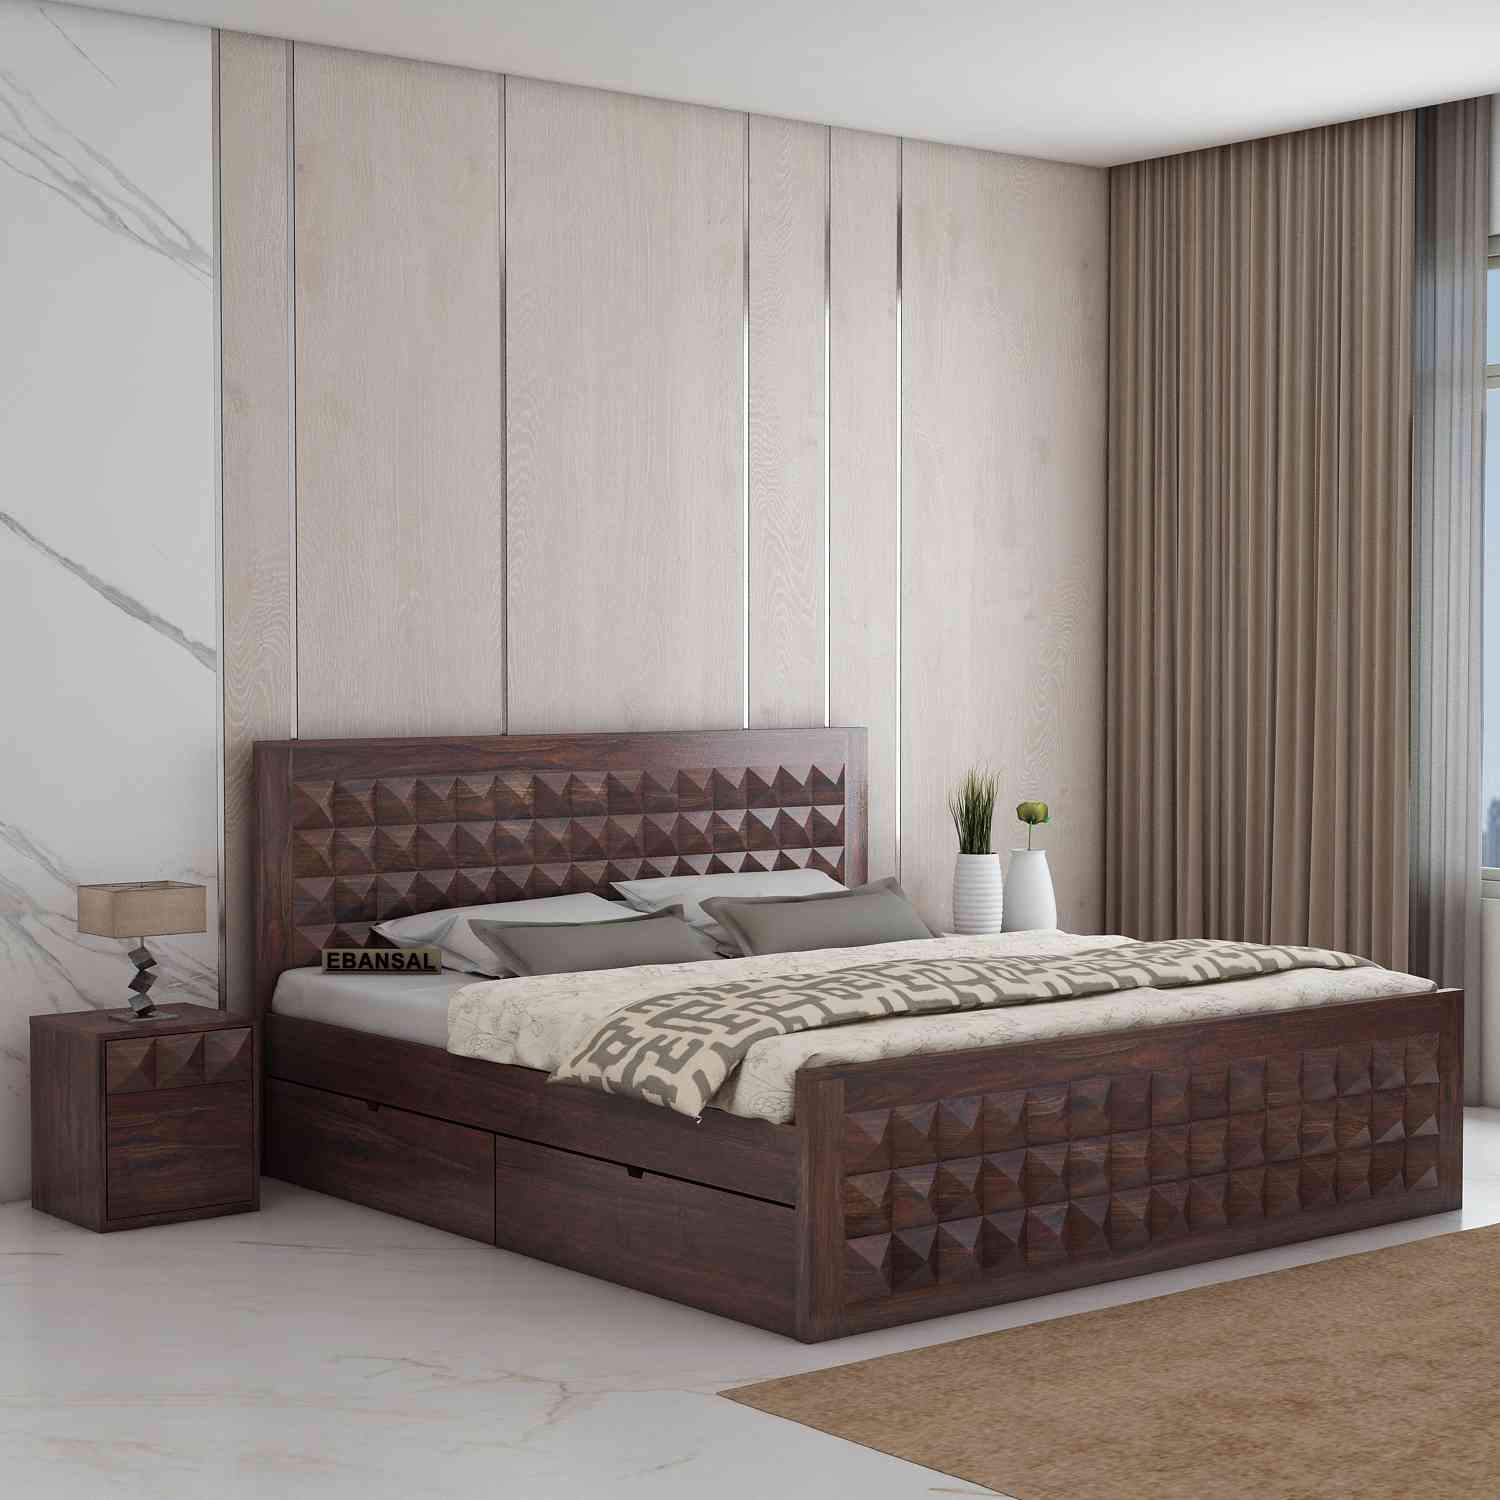 Sofia Solid Sheesham Wood Bed With Four Drawers (Queen Size, Walnut Finish)